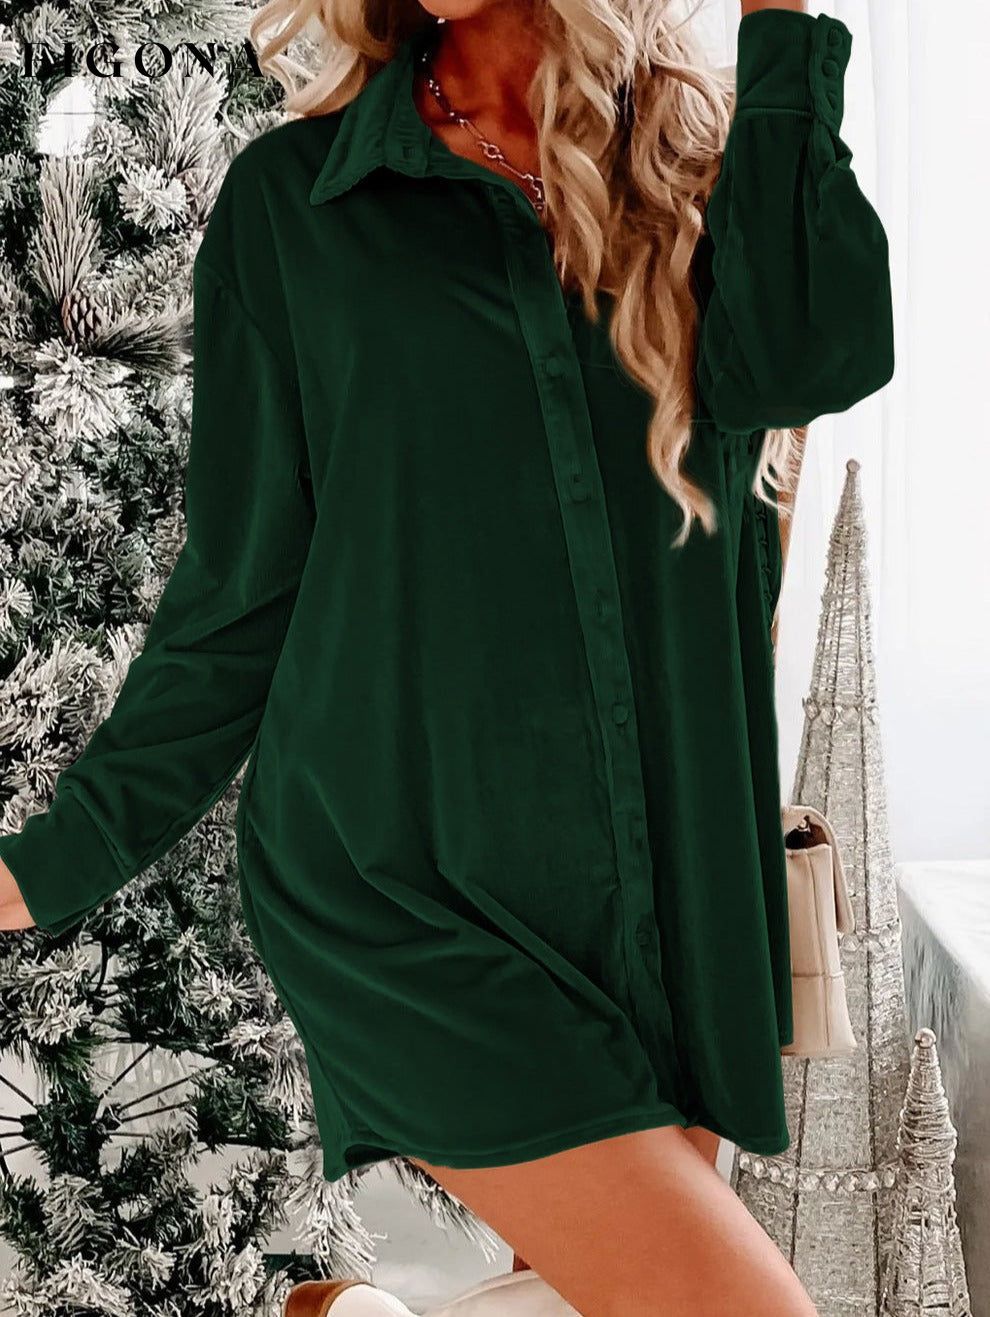 Blackish Green Velvet Button Front Shirt Long Sleeve Casual Mini Dress All In Stock Best Sellers casual dresses clothes Color Green Day Christmas dress dresses EDM Monthly Recomend Fabric Velvet Hot picks long sleeve dresses long sleve dresses Print Solid Color Season Fall & Autumn short dresses Style Southern Belle